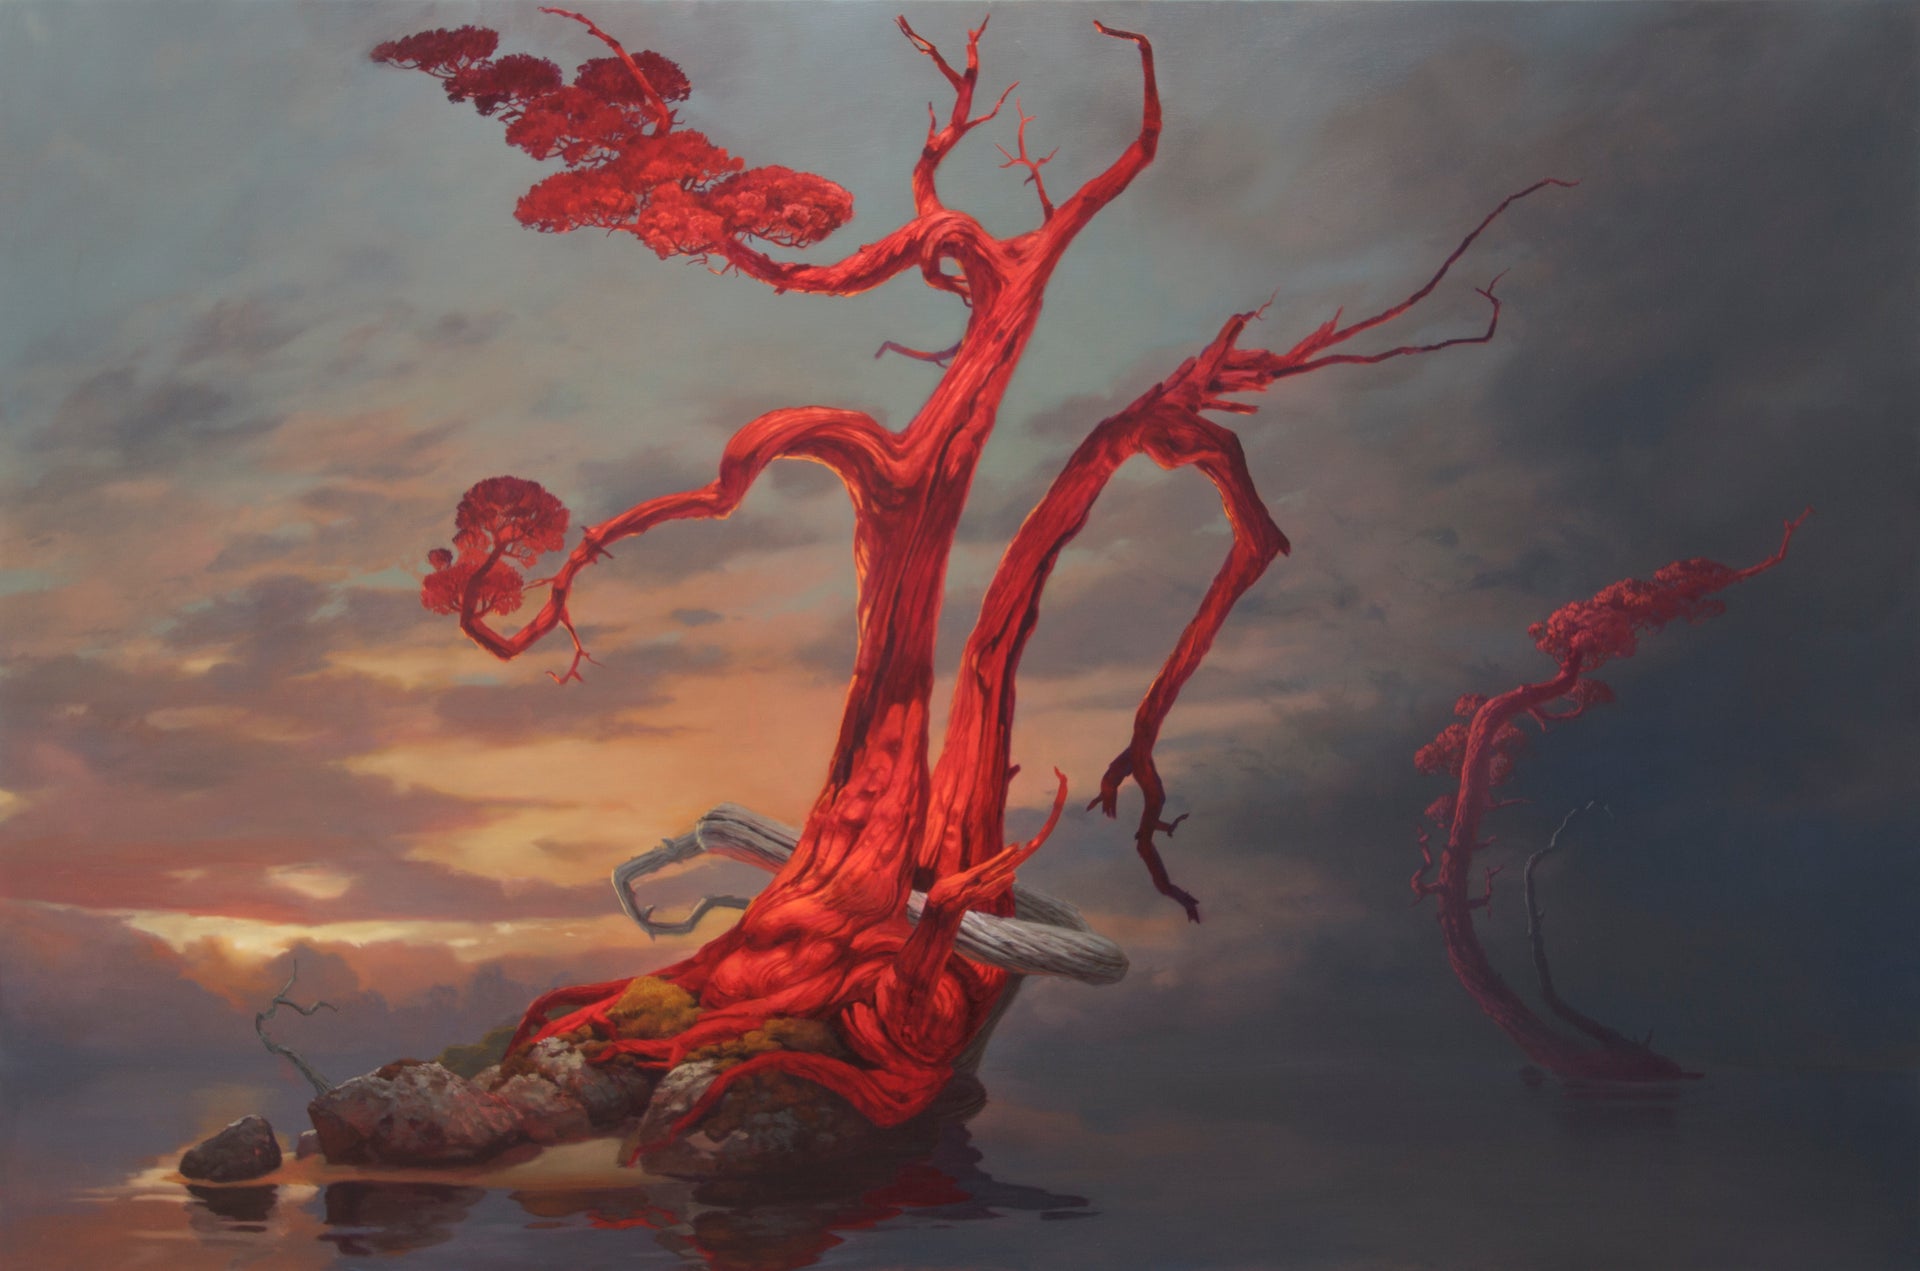 The Red Tree is alone